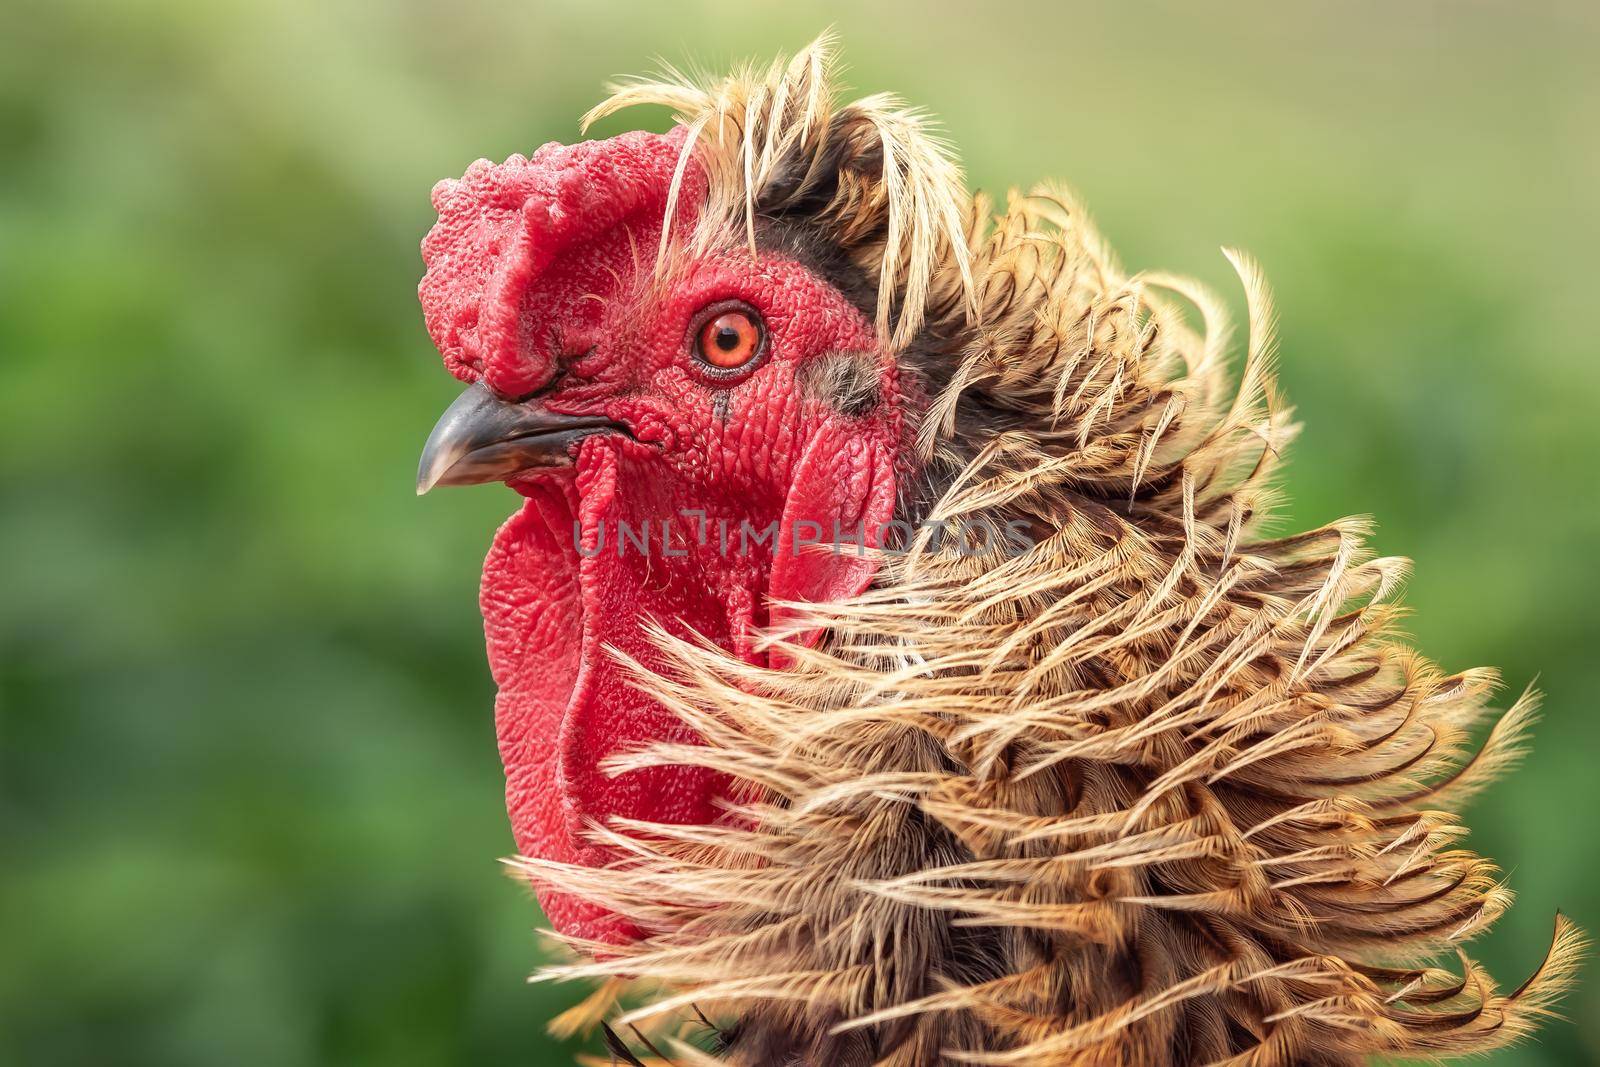 Golden rooster portrait on a green background by Lincikas